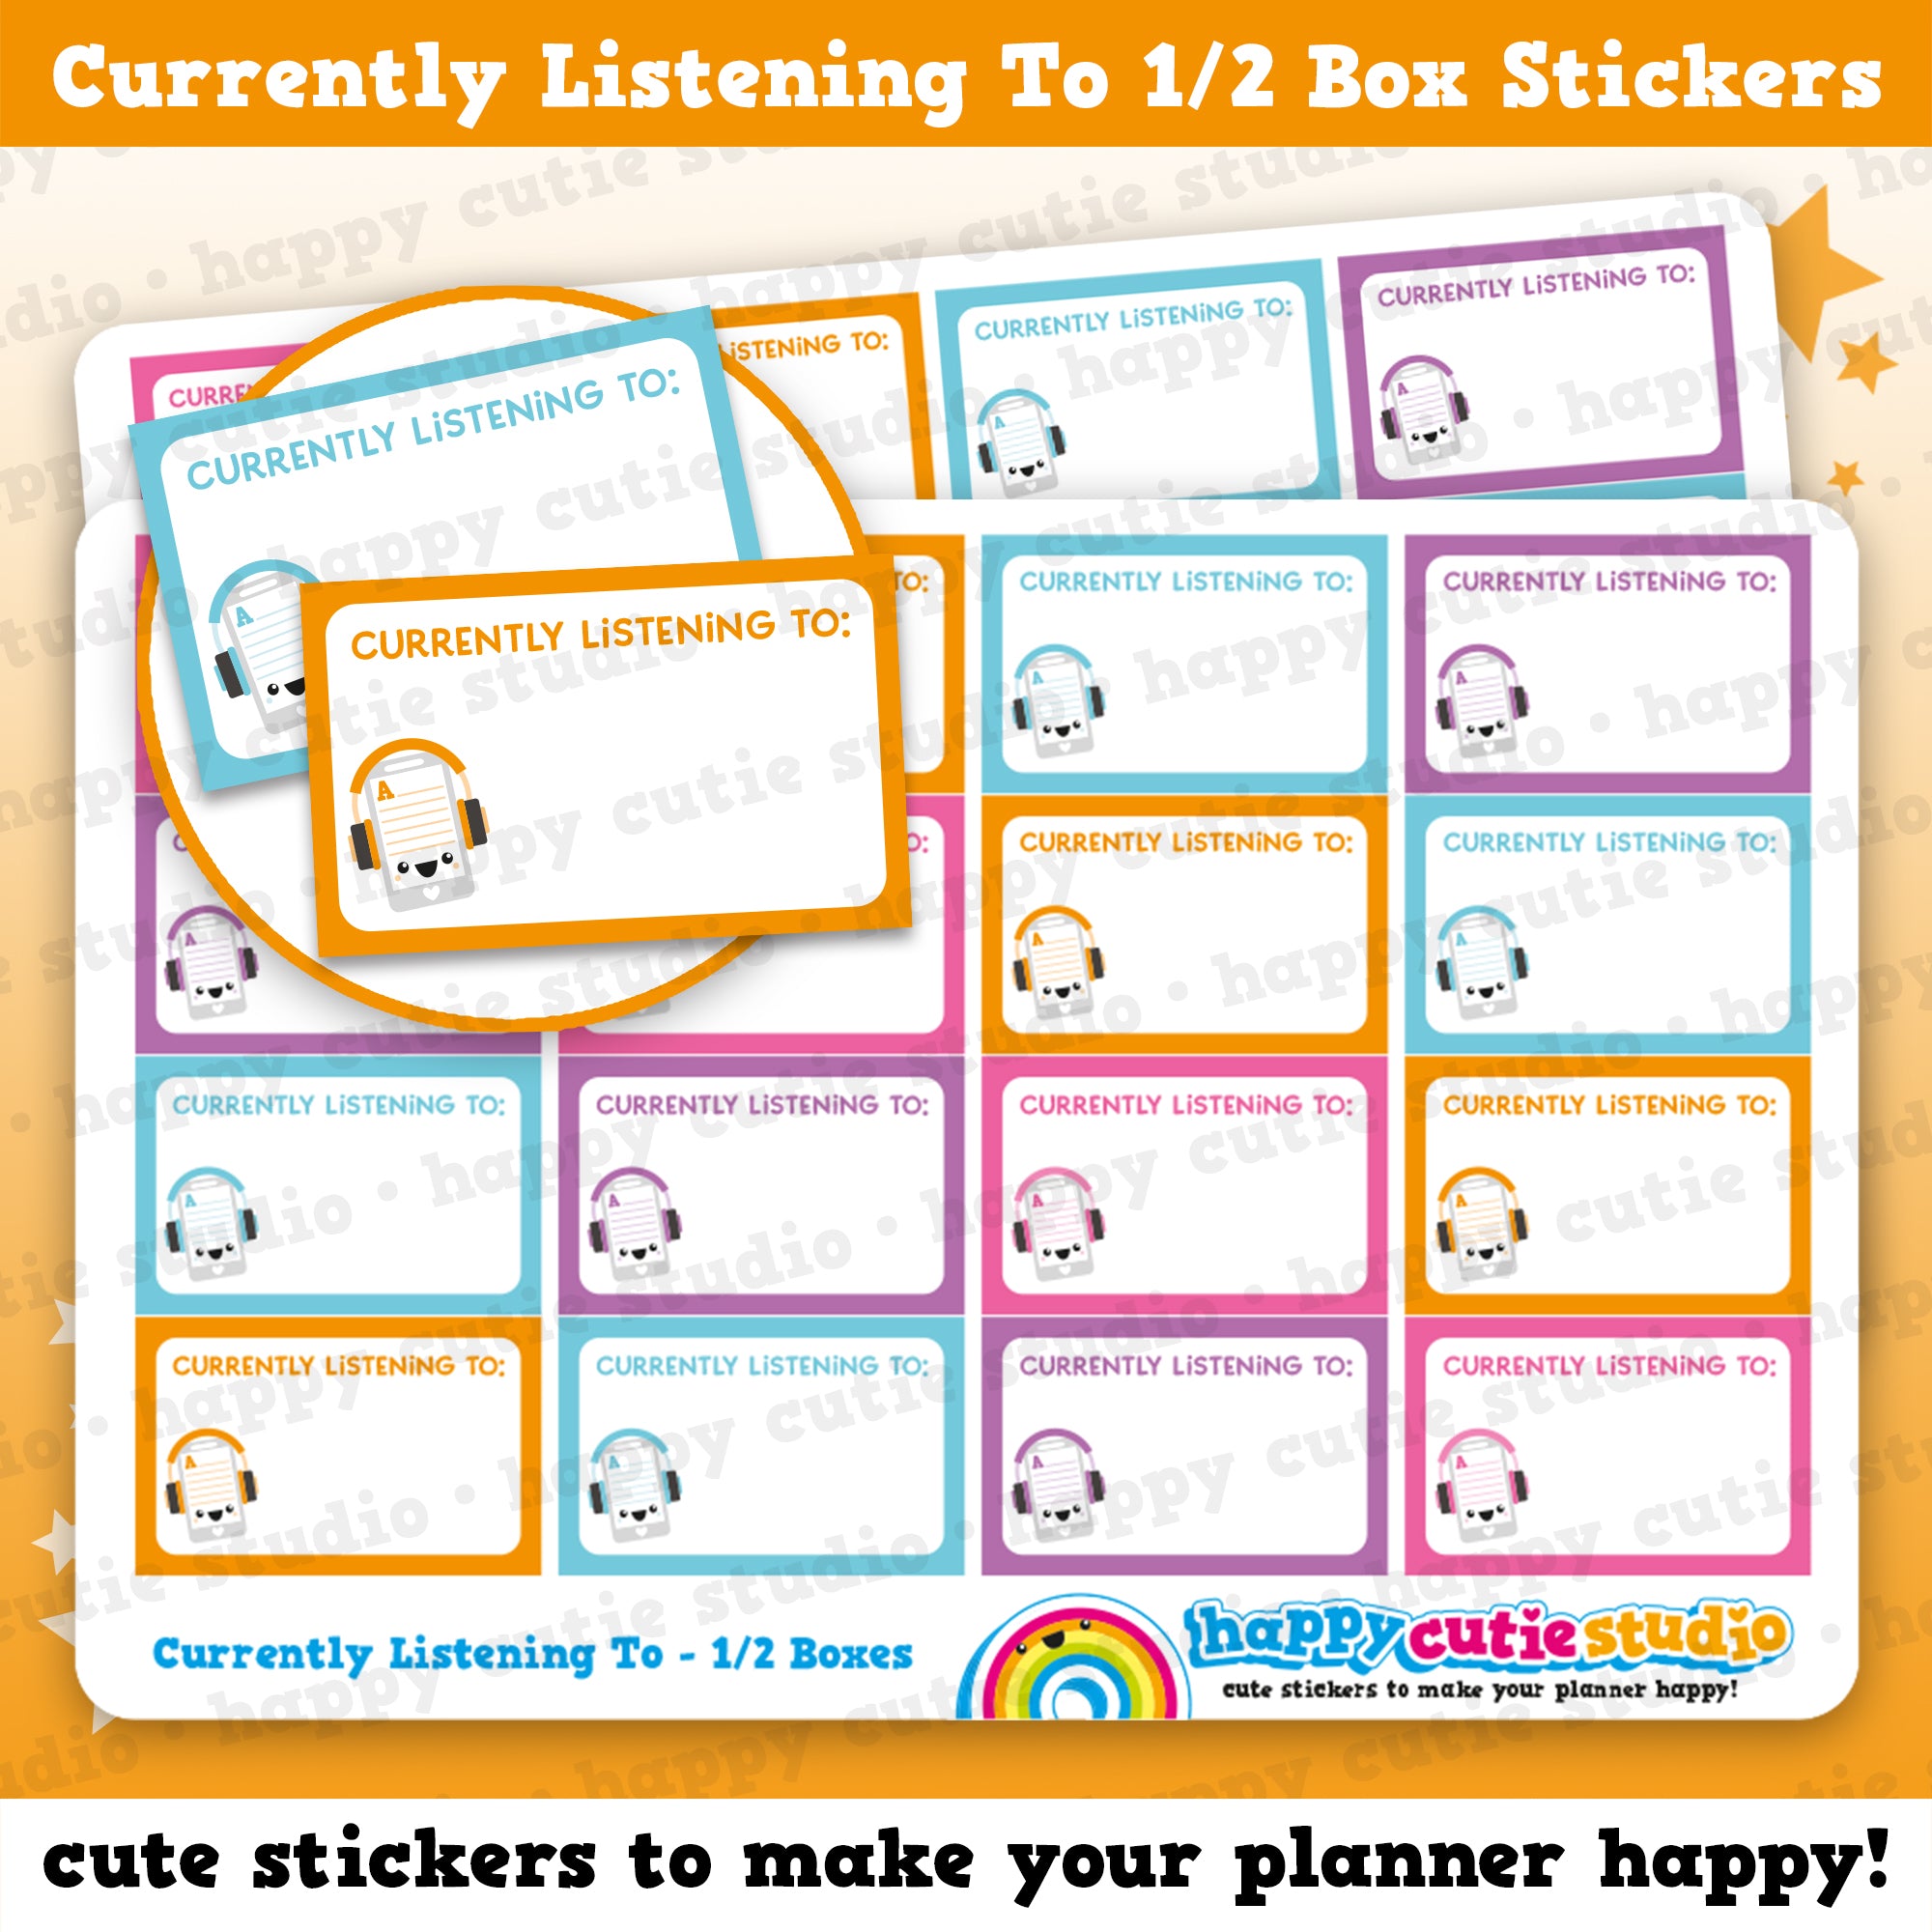 16 Cute Half Box Currently Listening To Planner Stickers